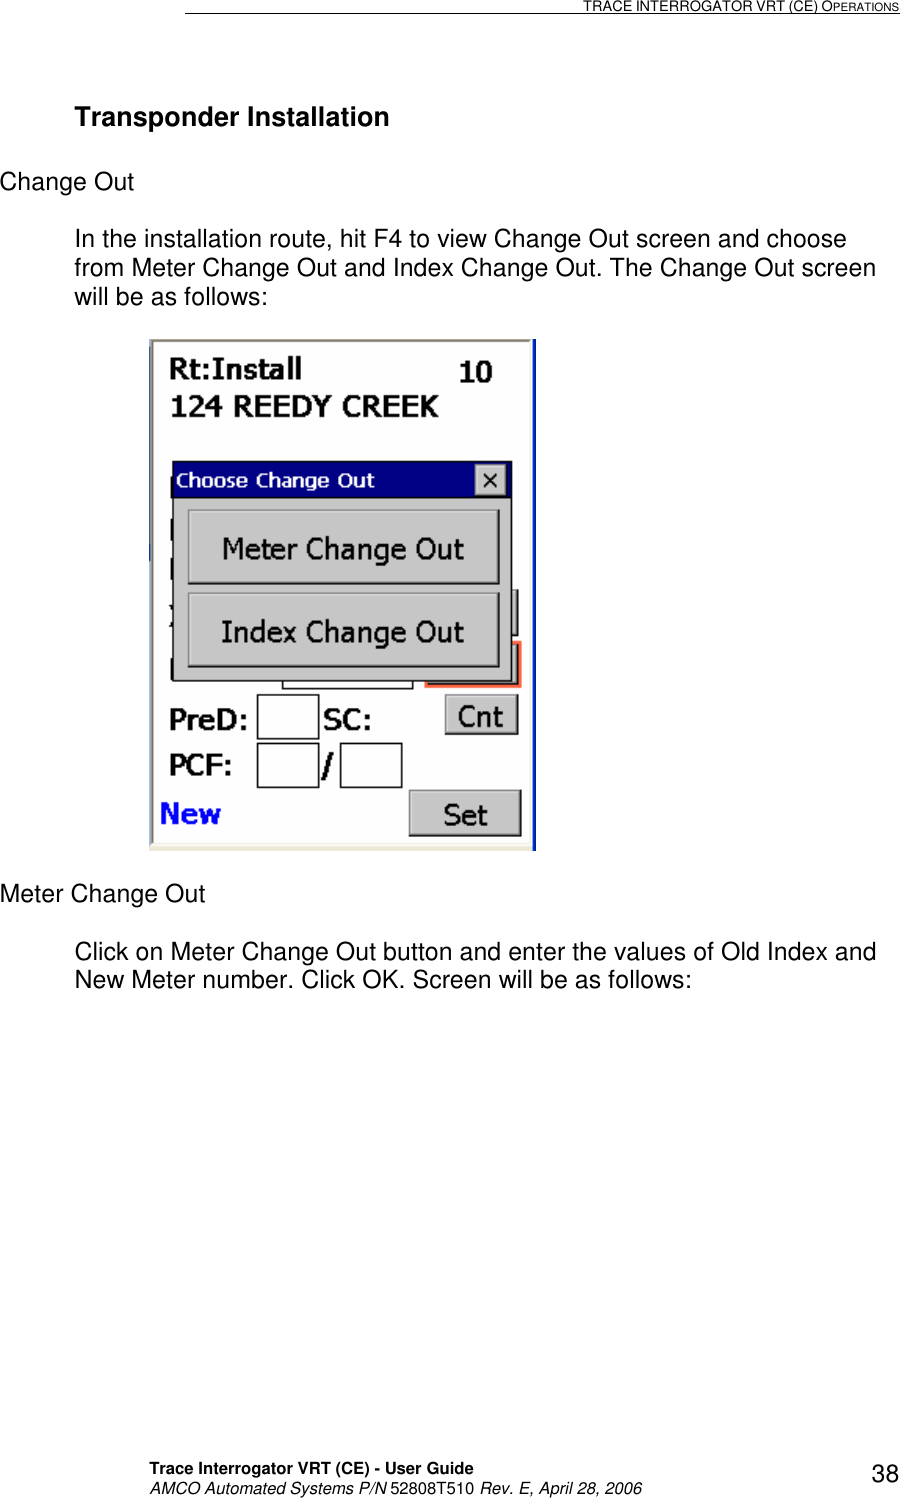                                                                                                                              TRACE INTERROGATOR VRT (CE) OPERATIONS    Trace Interrogator VRT (CE) - User Guide   AMCO Automated Systems P/N 52808T510 Rev. E, April 28, 2006 38Transponder Installation  Change Out   In the installation route, hit F4 to view Change Out screen and choose from Meter Change Out and Index Change Out. The Change Out screen will be as follows:    Meter Change Out  Click on Meter Change Out button and enter the values of Old Index and New Meter number. Click OK. Screen will be as follows:  